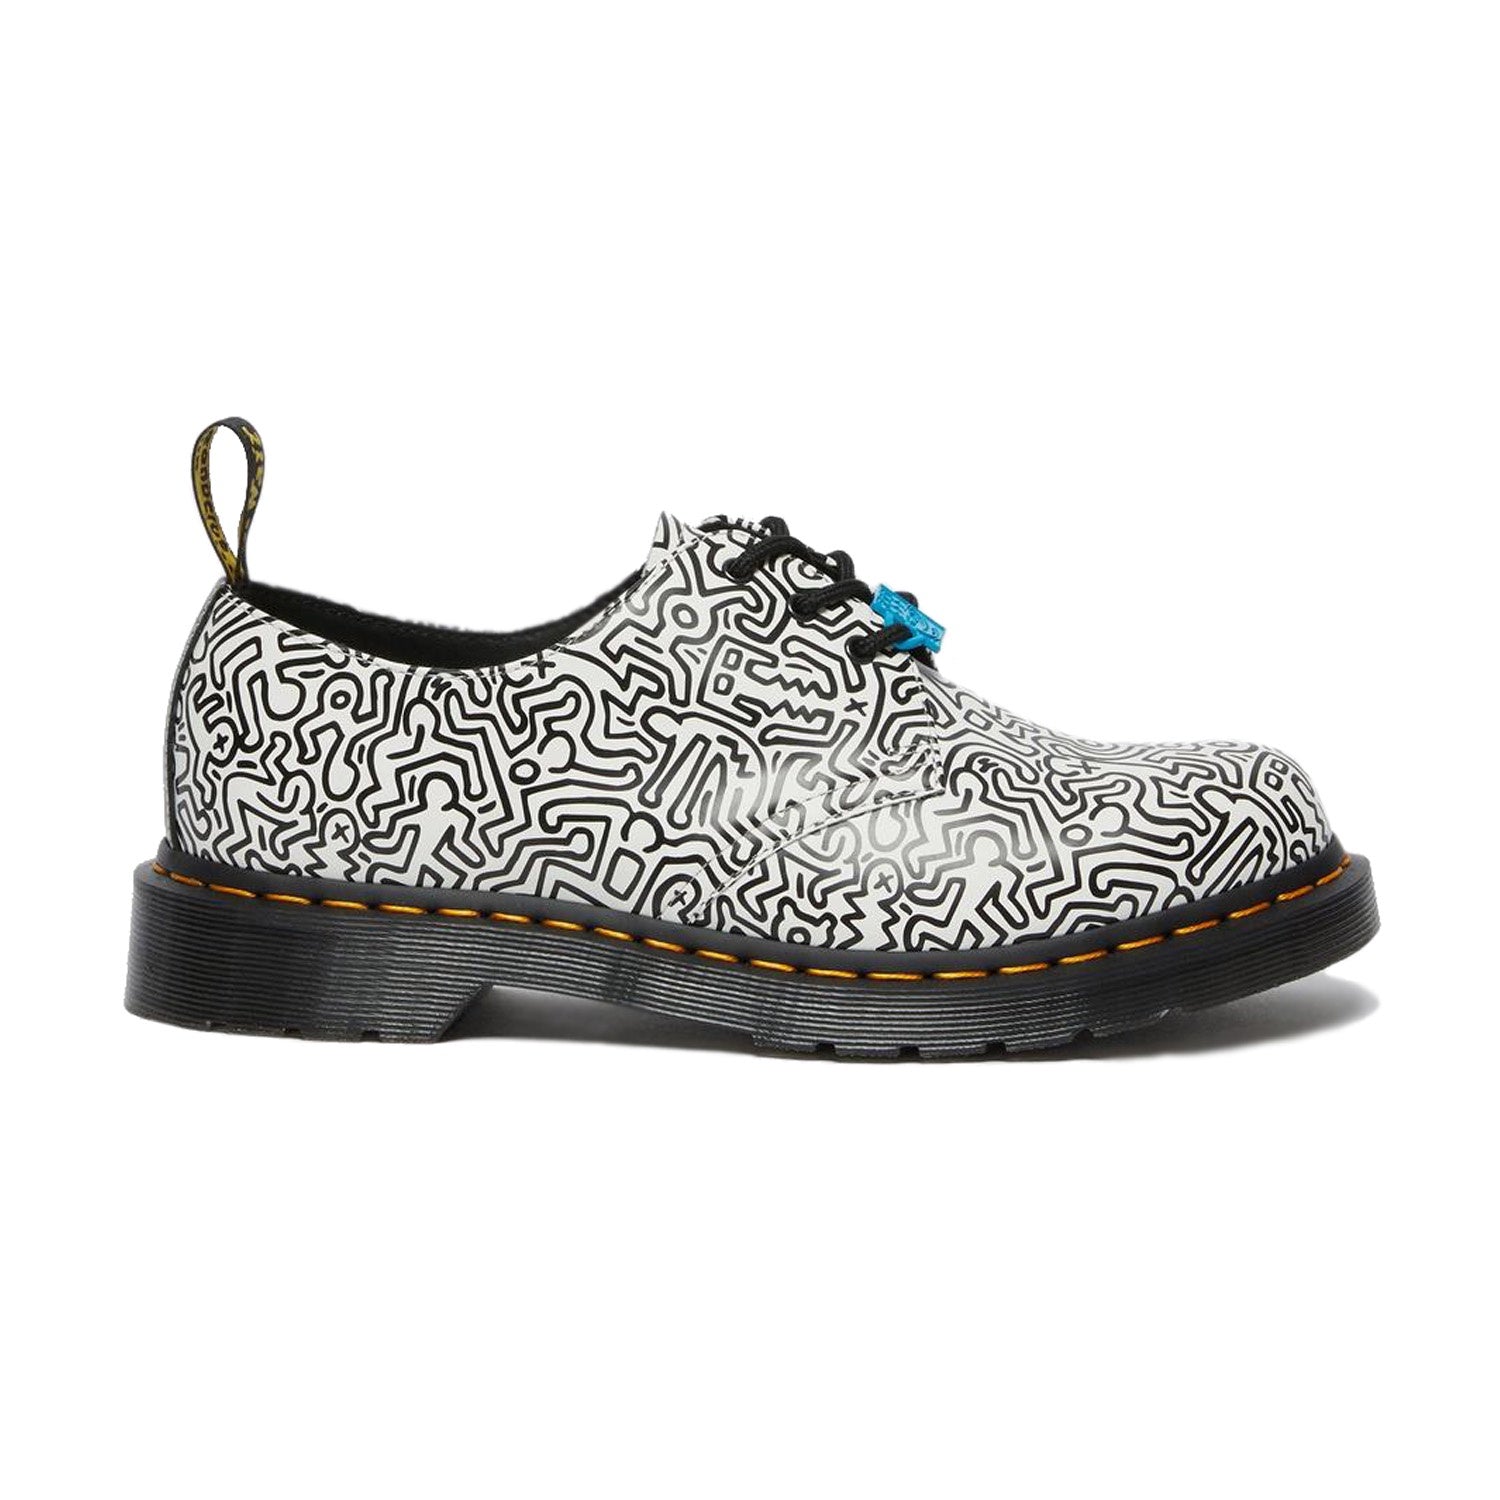 Dr. Martens 1461 Keith Haring Black and White Printed Leather Shoes